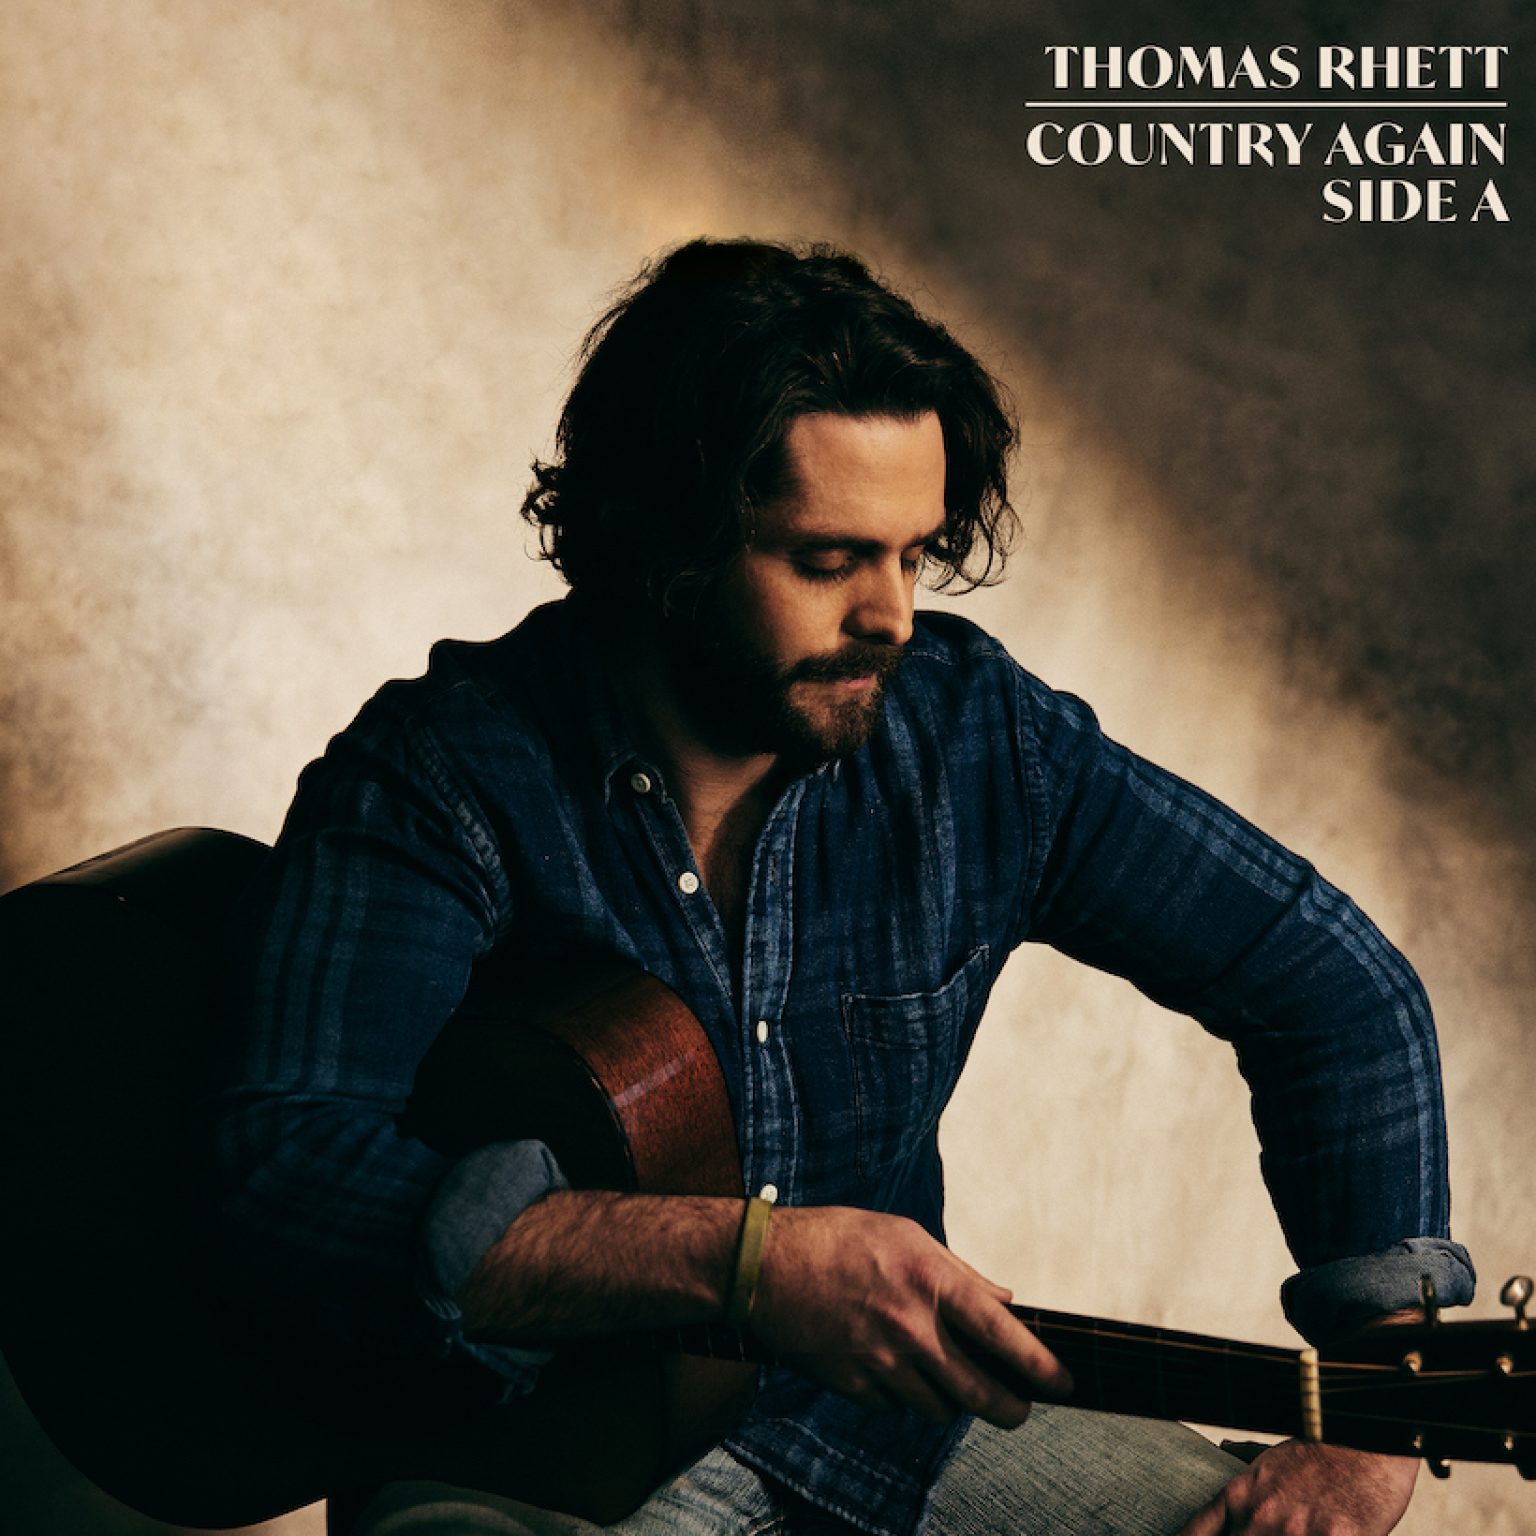 Thomas Rhett Shares Two Songs From 'Country Again Side A'